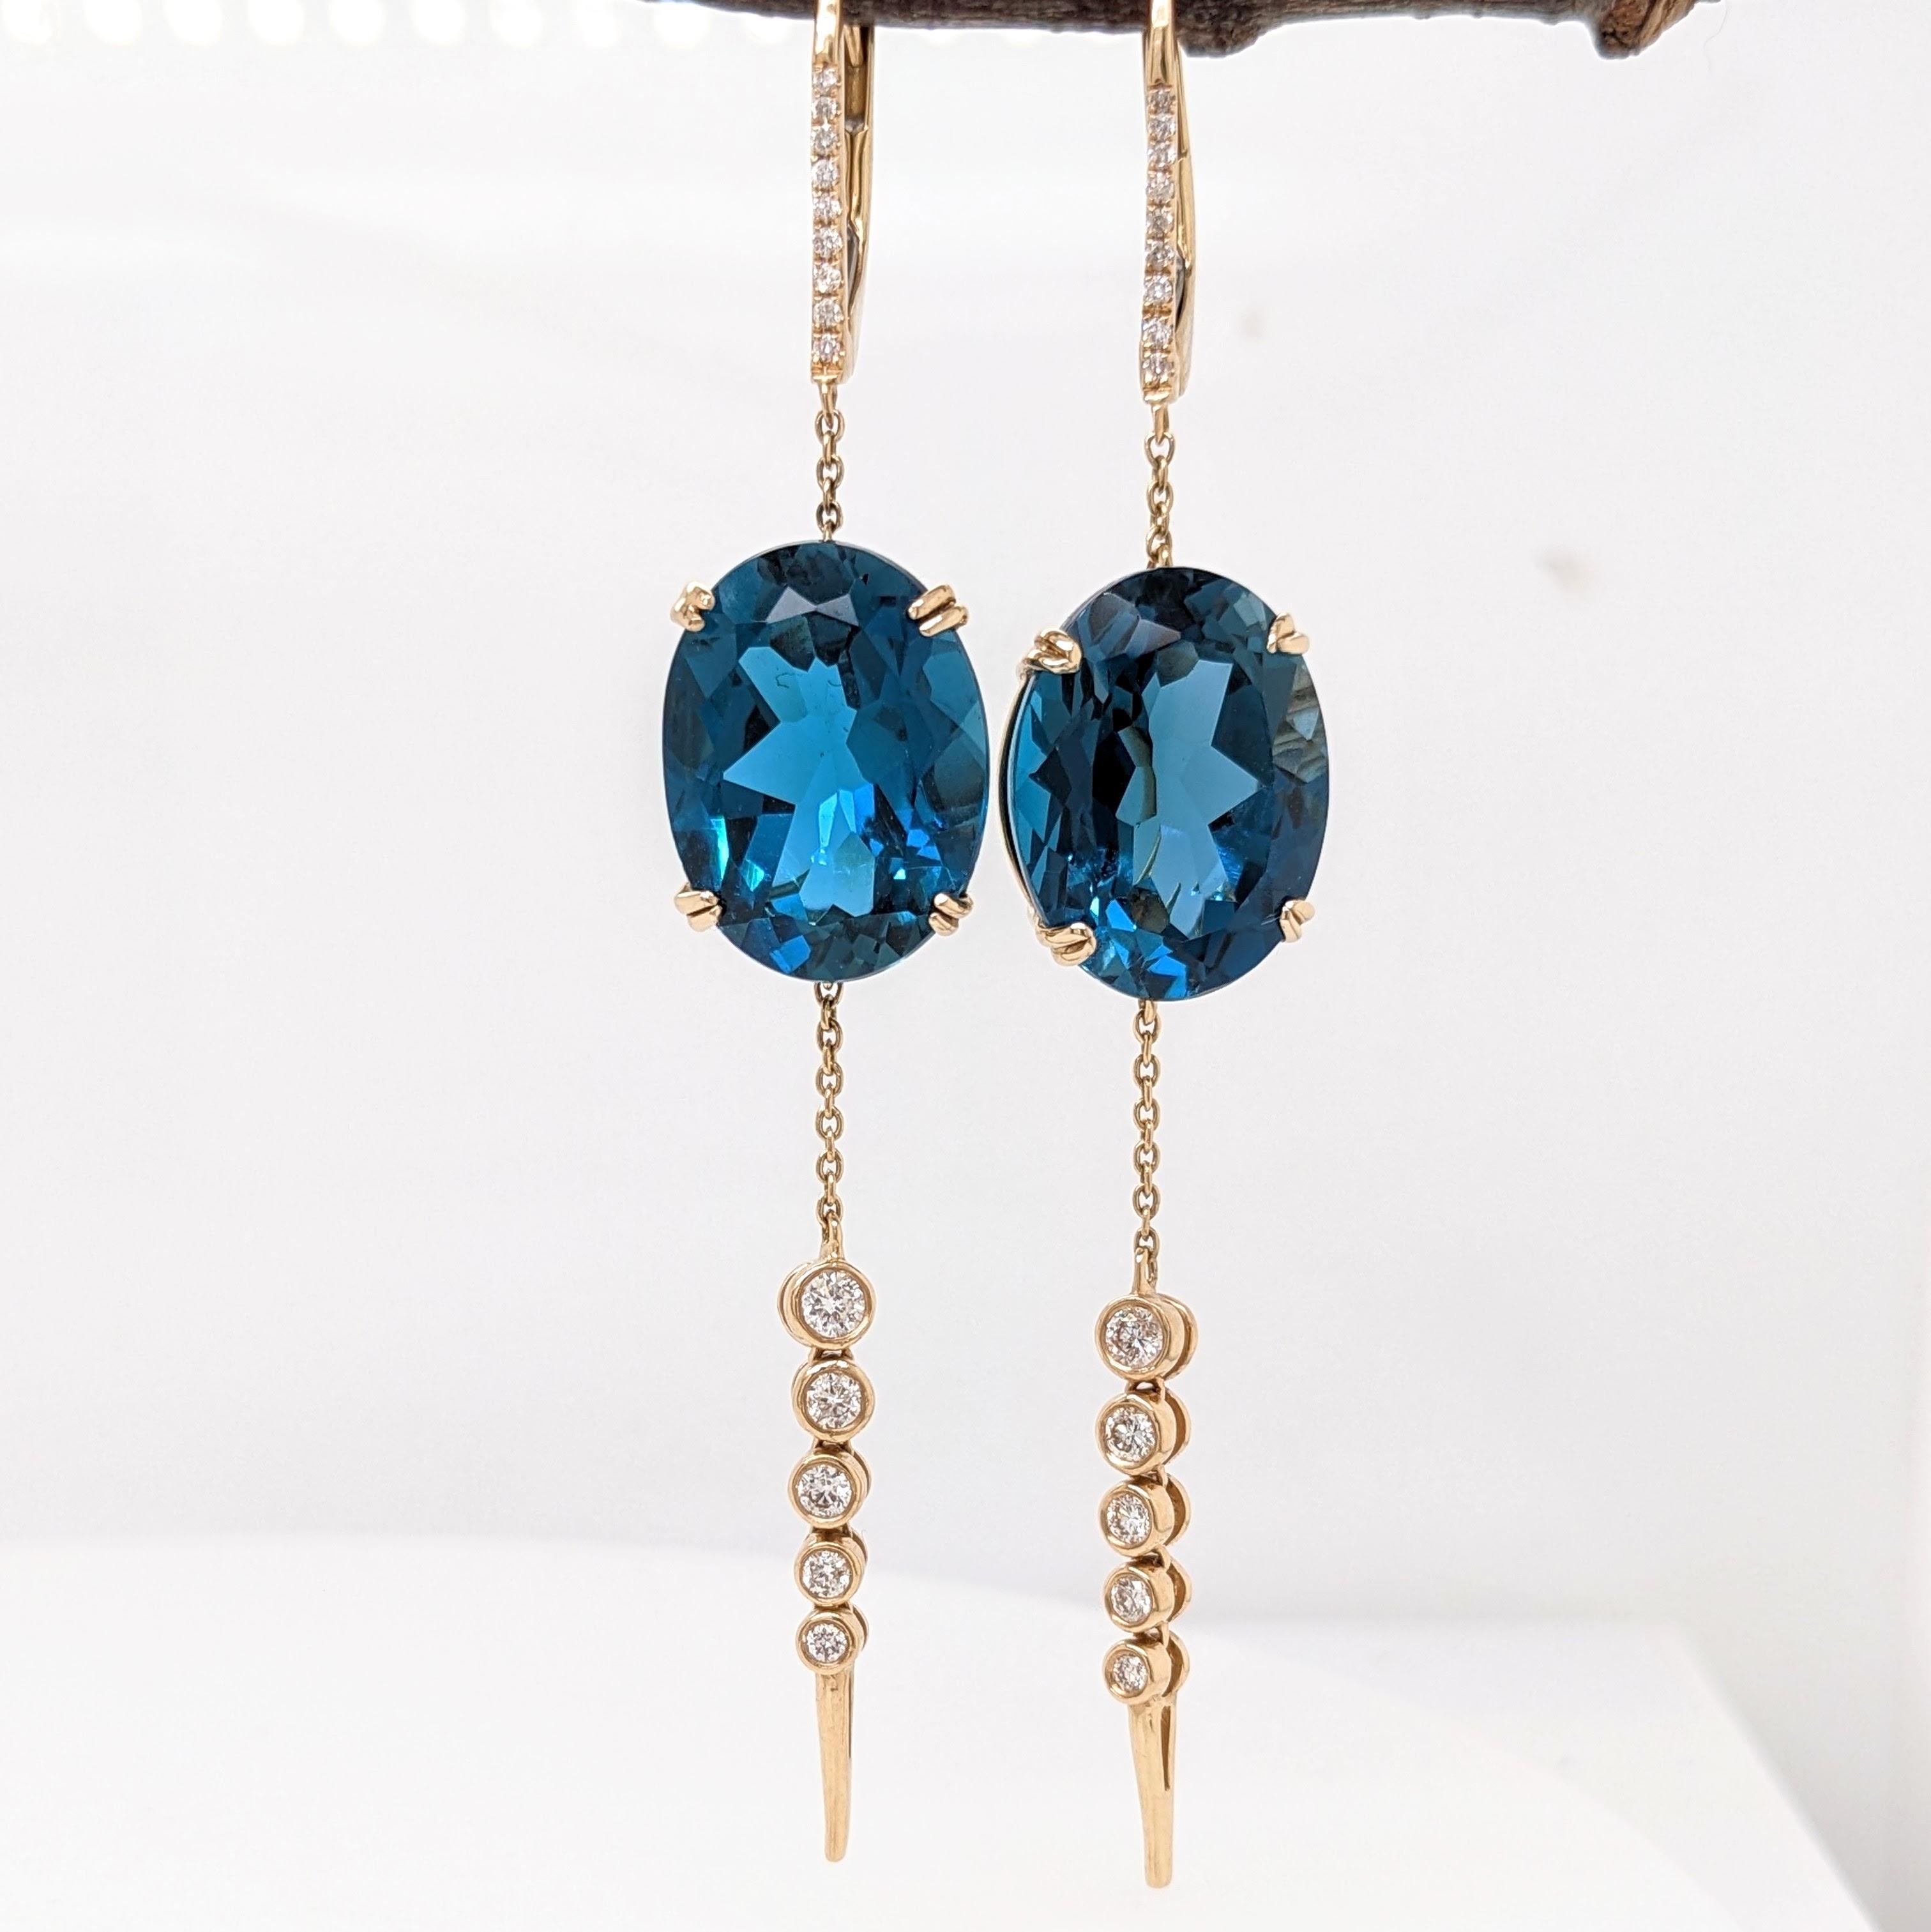 These gorgeous show-stopper earrings boast a pair of stunning london blue topaz, strung together in 14k yellow gold with natural diamonds for an elegant sweeping look. A great option to elevate any evening wear and turn heads wherever you go!